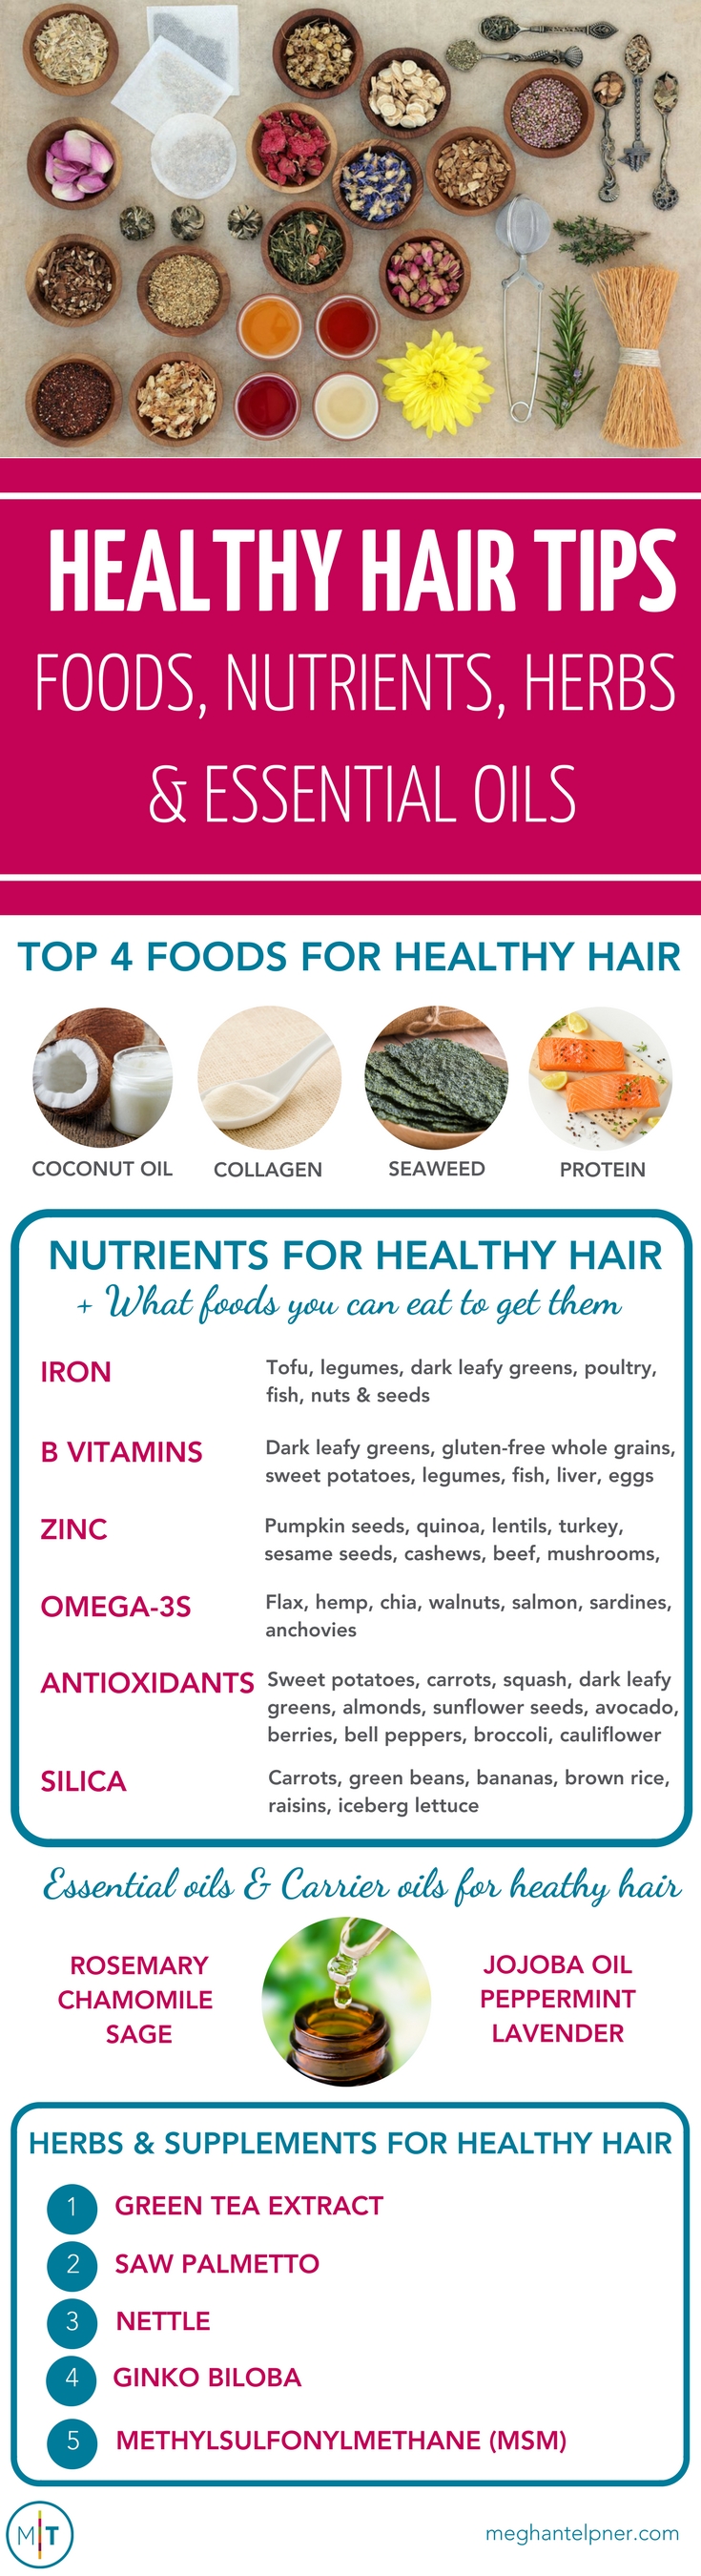 Healthy Hair Tips: Foods, Nutrients, Herbs and Essential Oils